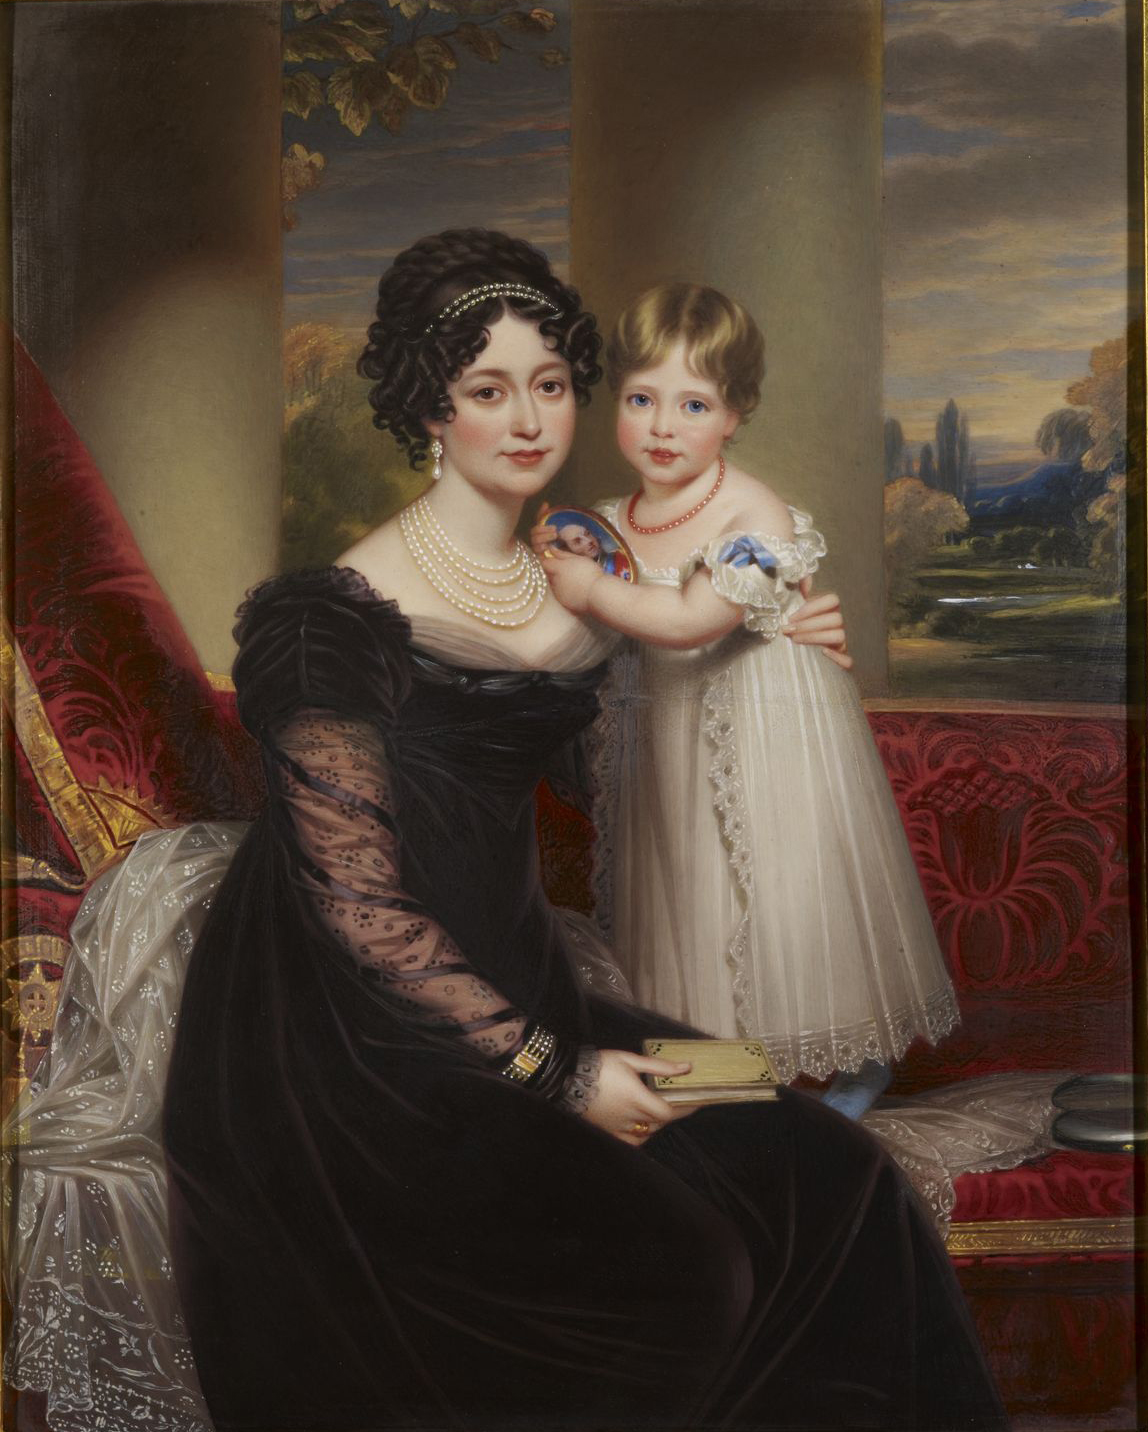 The duchess of Kent with her daughter, the future queen Victoria by Henry Bone, 1825